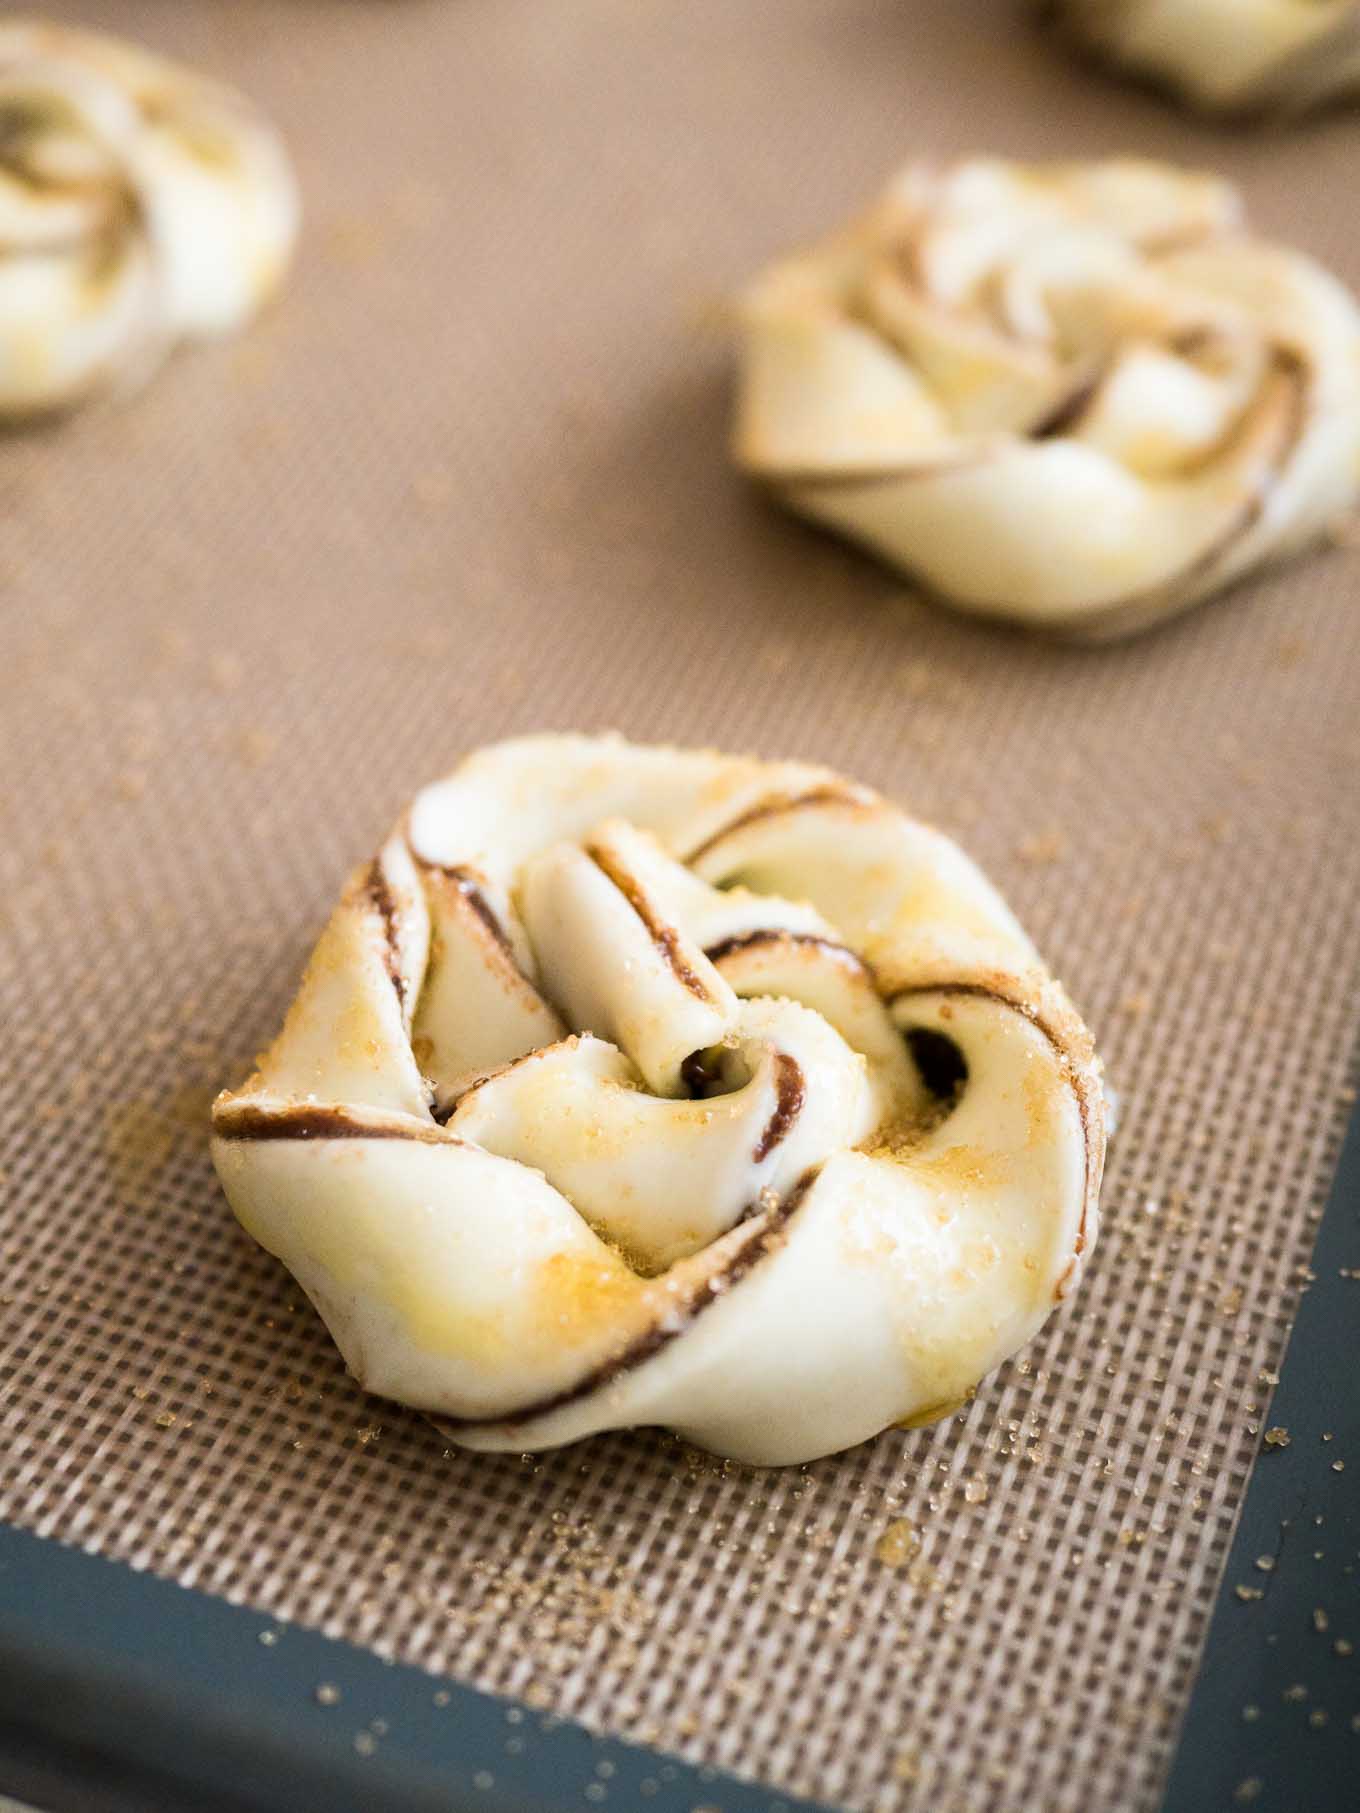 These Twisted Nutella Danish pastries are buttery, flaky, and filled with Nutella! Easy enough to whip up on a weeknight, yet special enough for a party.